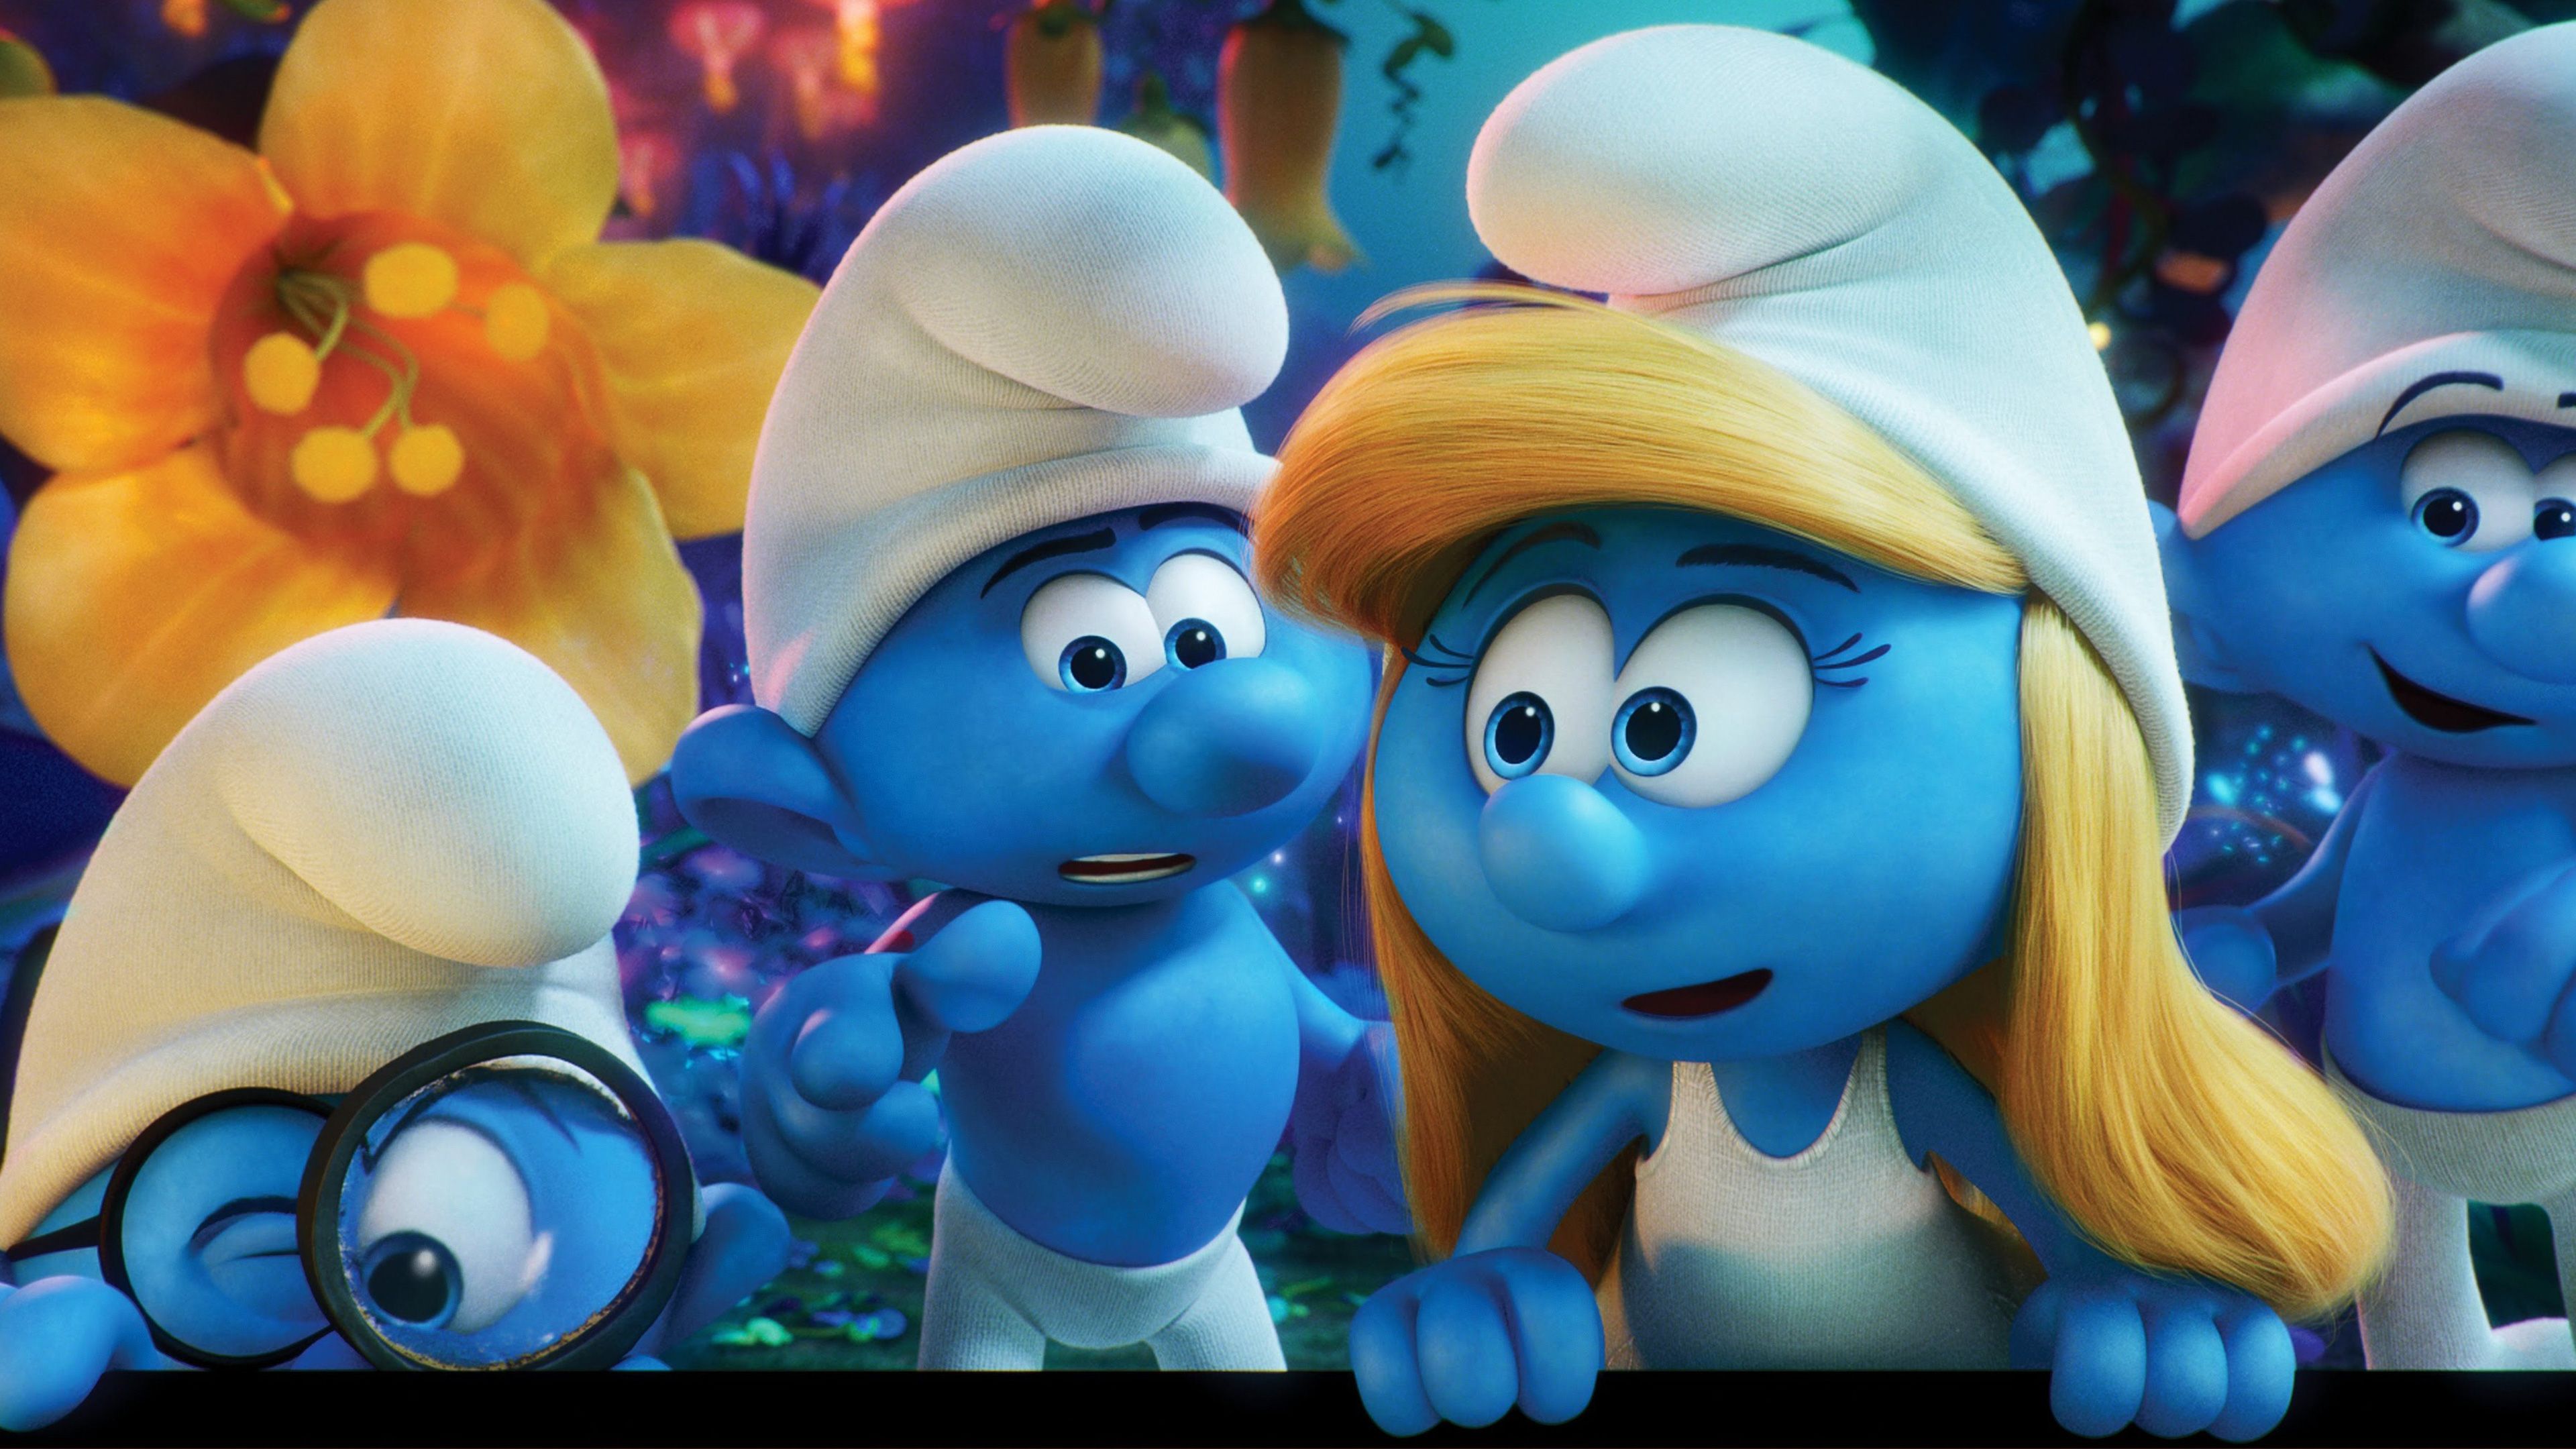 Smurfs 4K wallpaper for your desktop or mobile screen free and easy to download